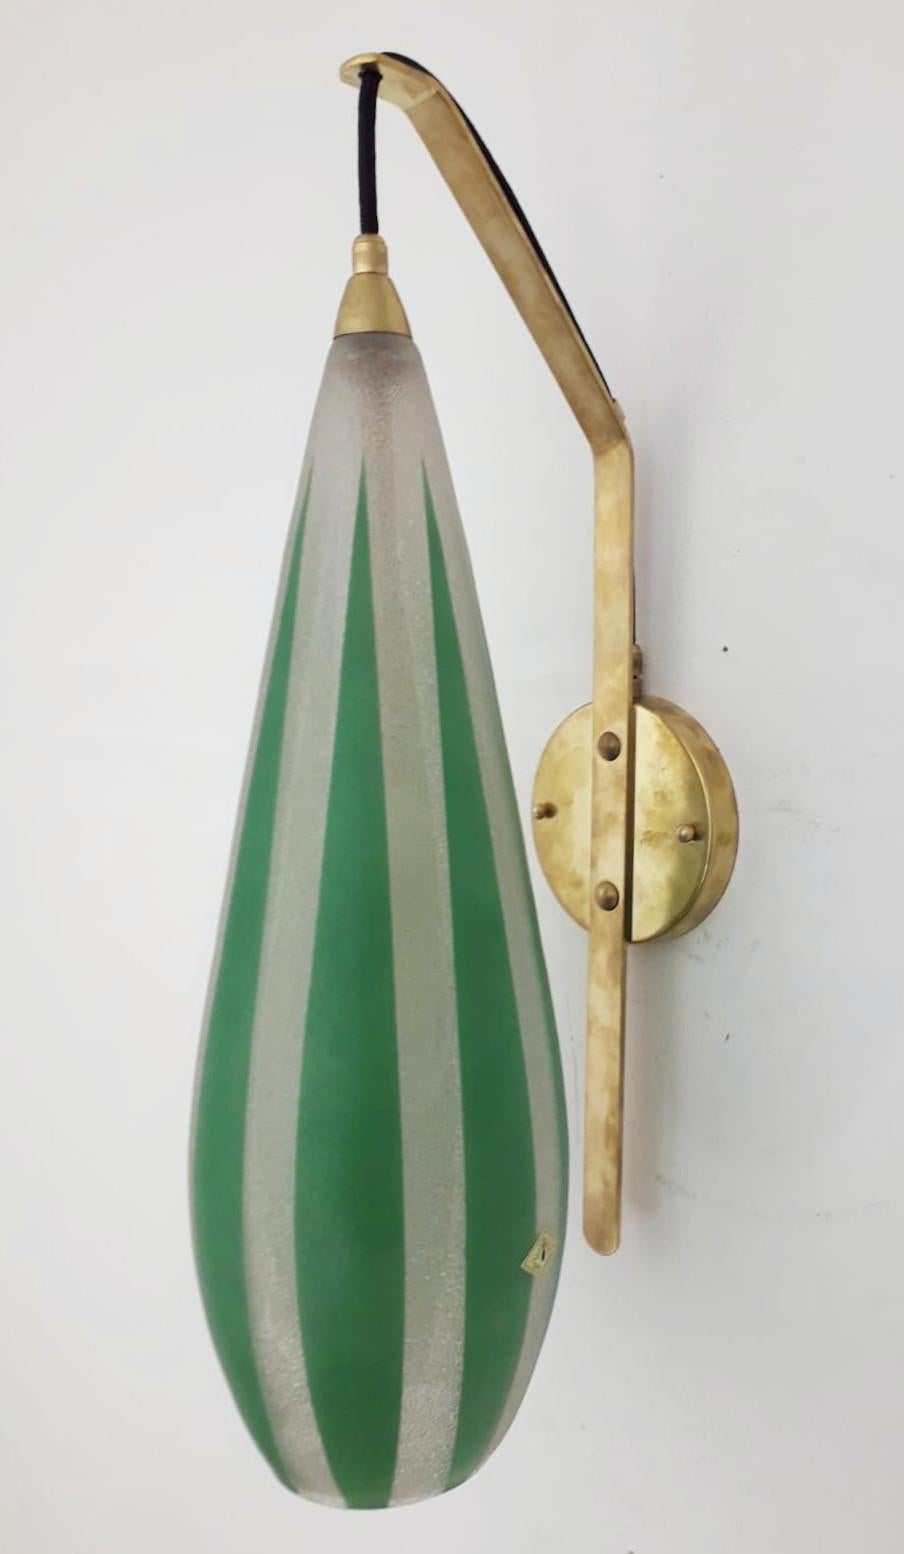 Vintage wall light consisting of a large glass diffuser with green stripes, suspended with a cable from a brass frame / Made in Germany by Das Licht, circa 1960s
Original sticker on the glass
1 light / E12 or E14 type / max 40W
Measures: Height 20